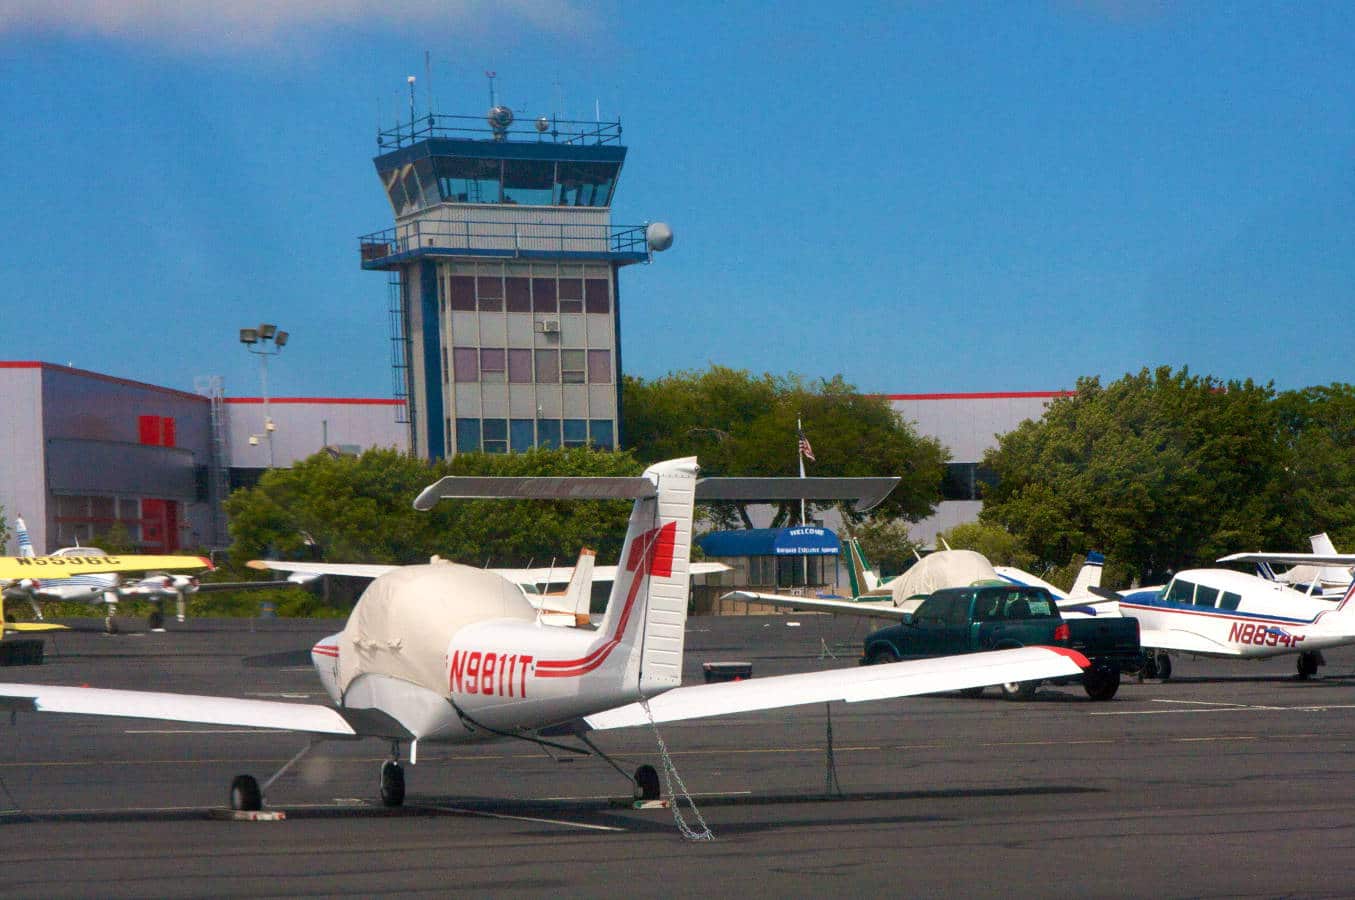 Small aircraft parked near an ATC tower - Follow Up on the FAA Hiring Scandal